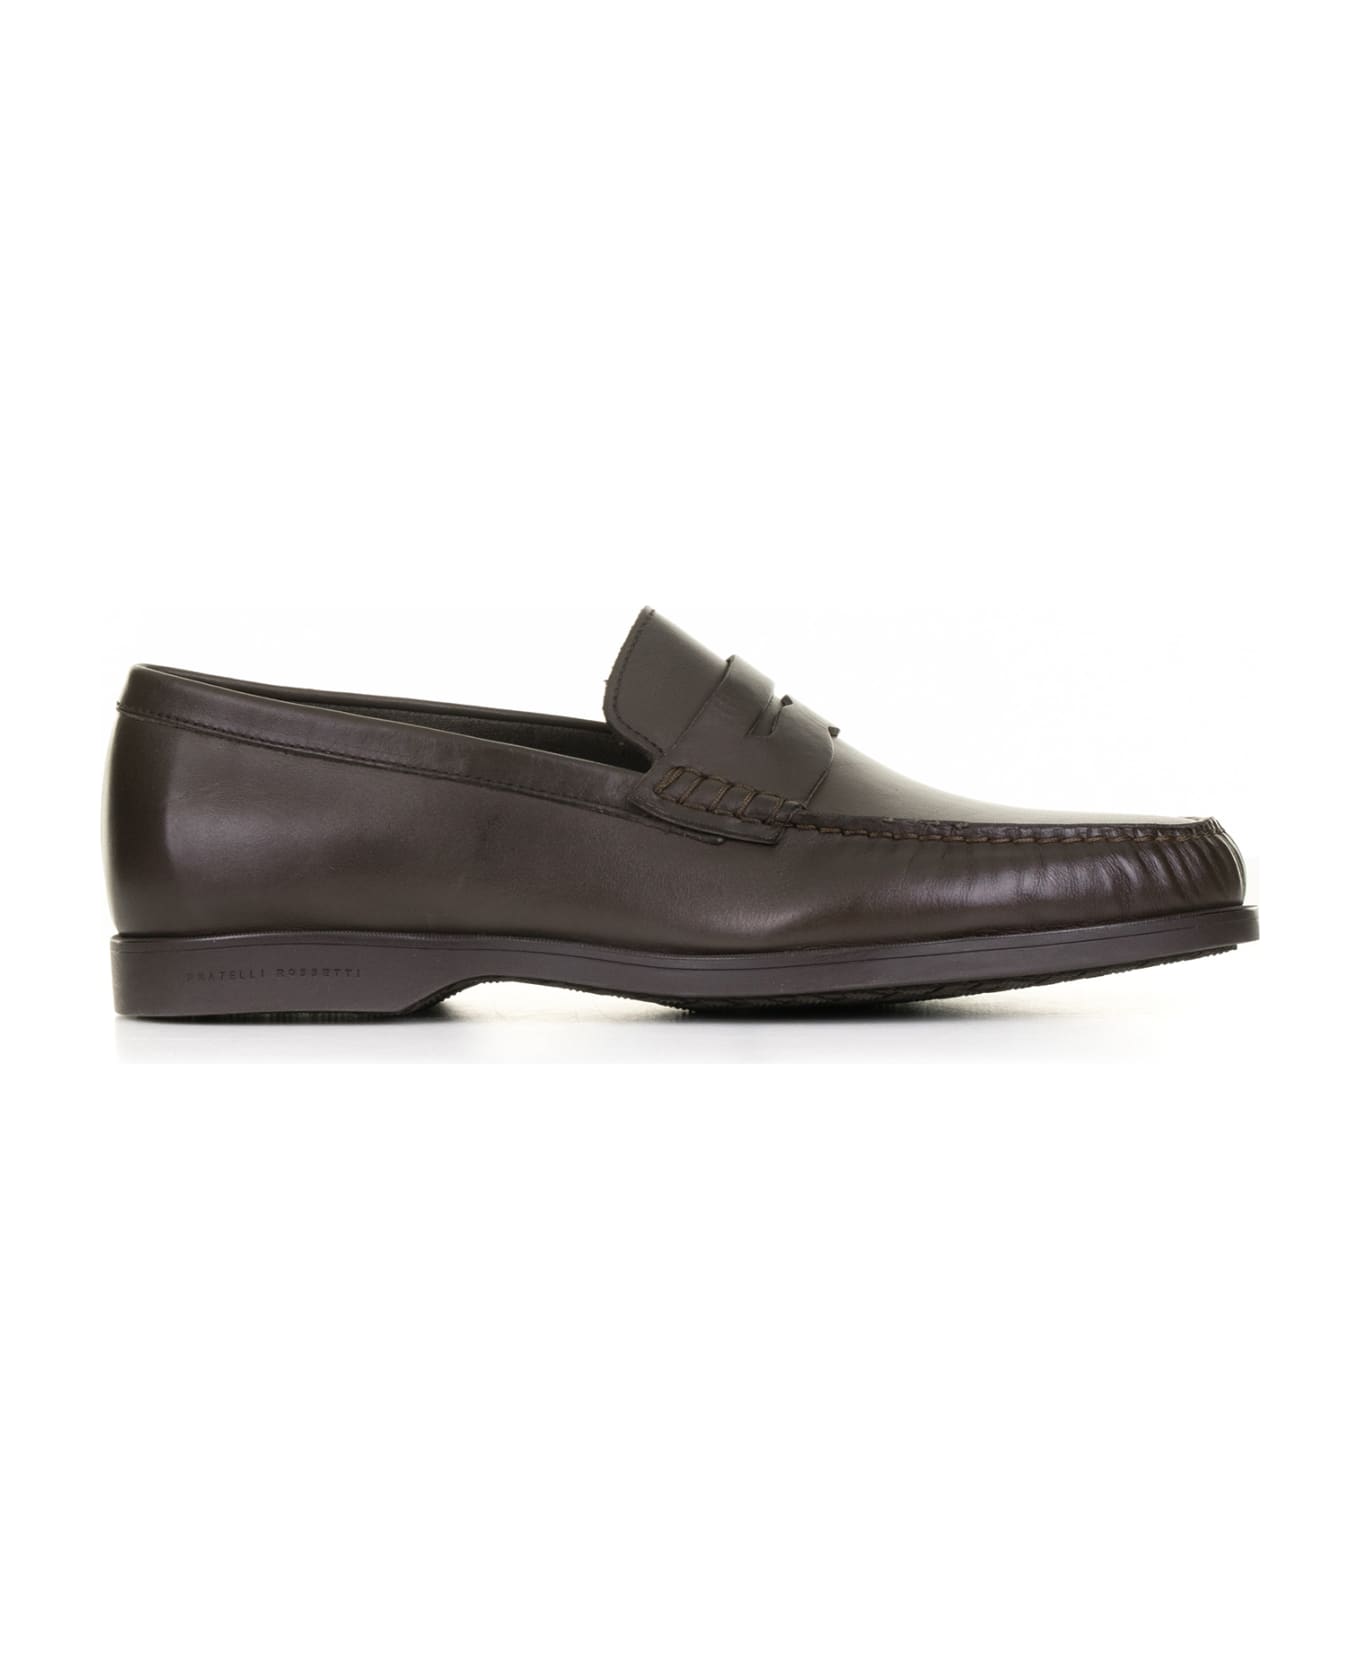 Fratelli Rossetti Brown Leather Moccasin - T.MORO